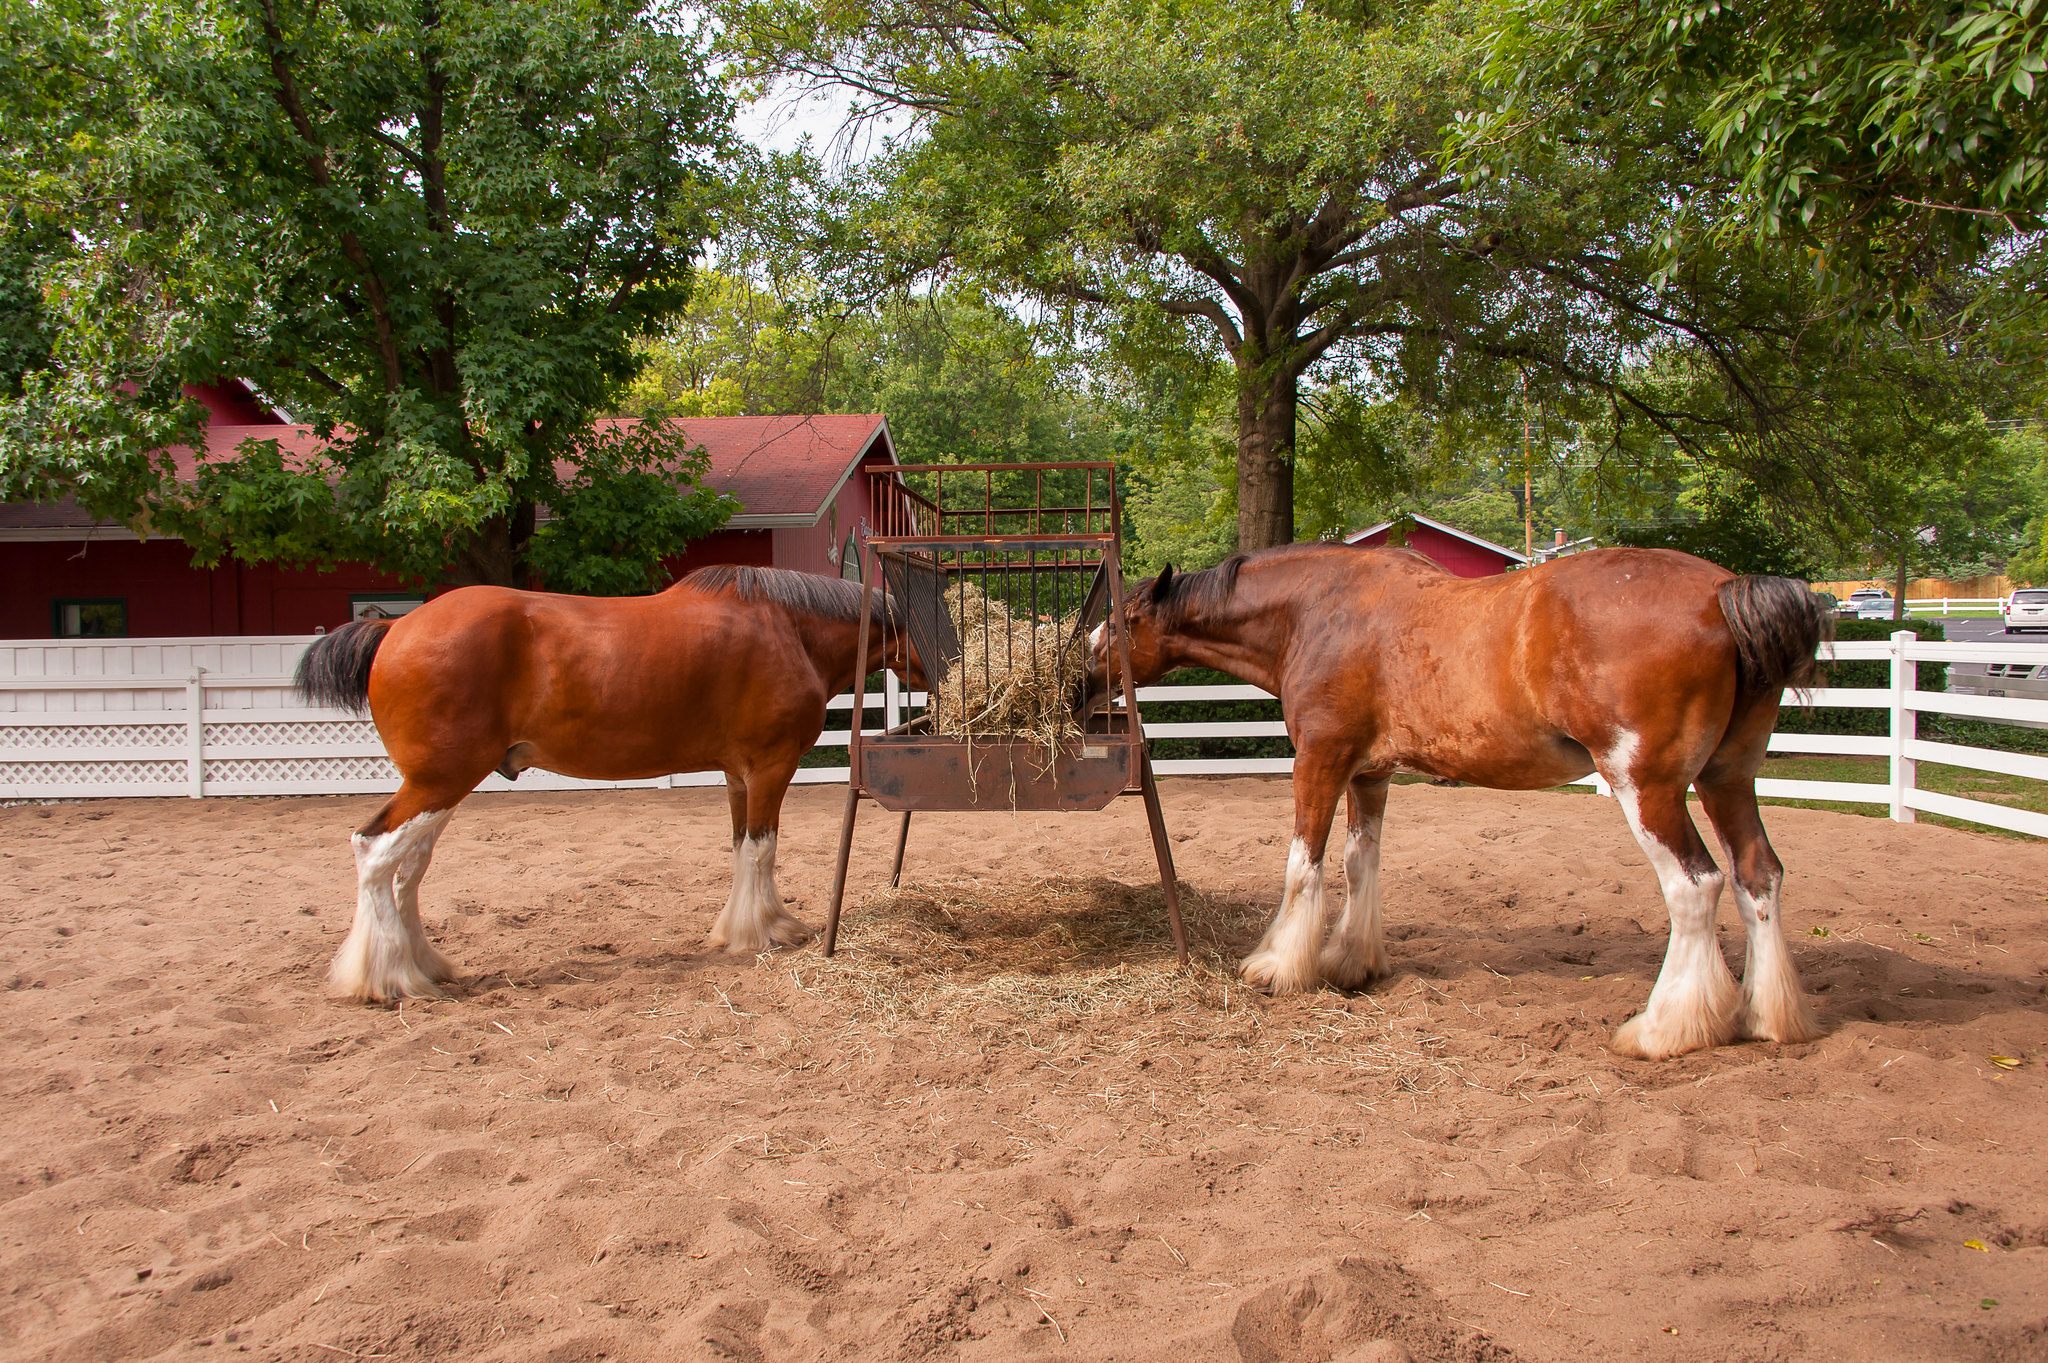 The Budweiser Clydesdales at Grant's Farm in St. Louis.